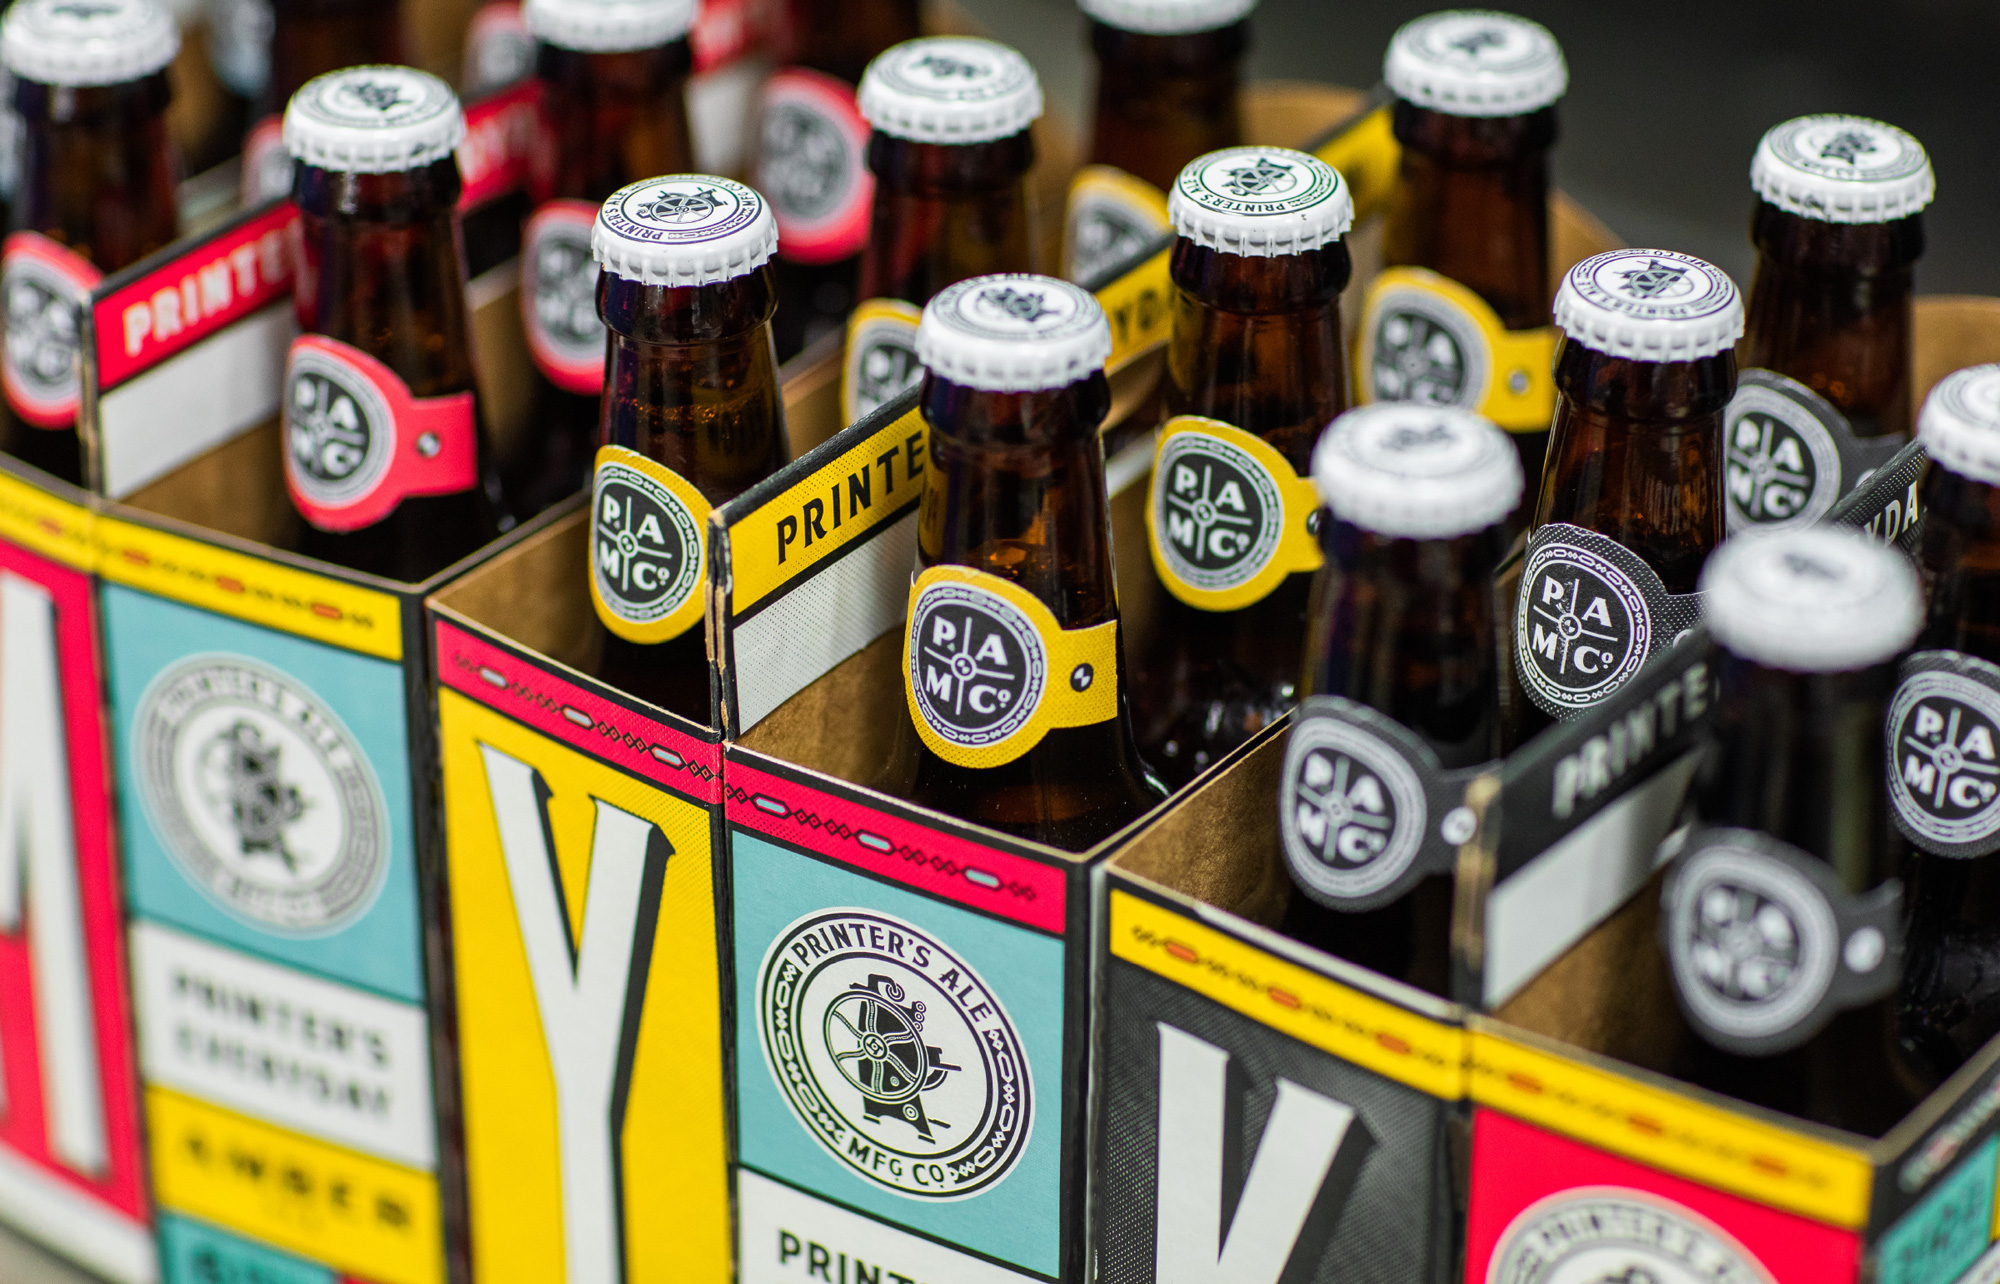 New Logo and Packaging for Printer's Ale Manufacturing Co. by CODO